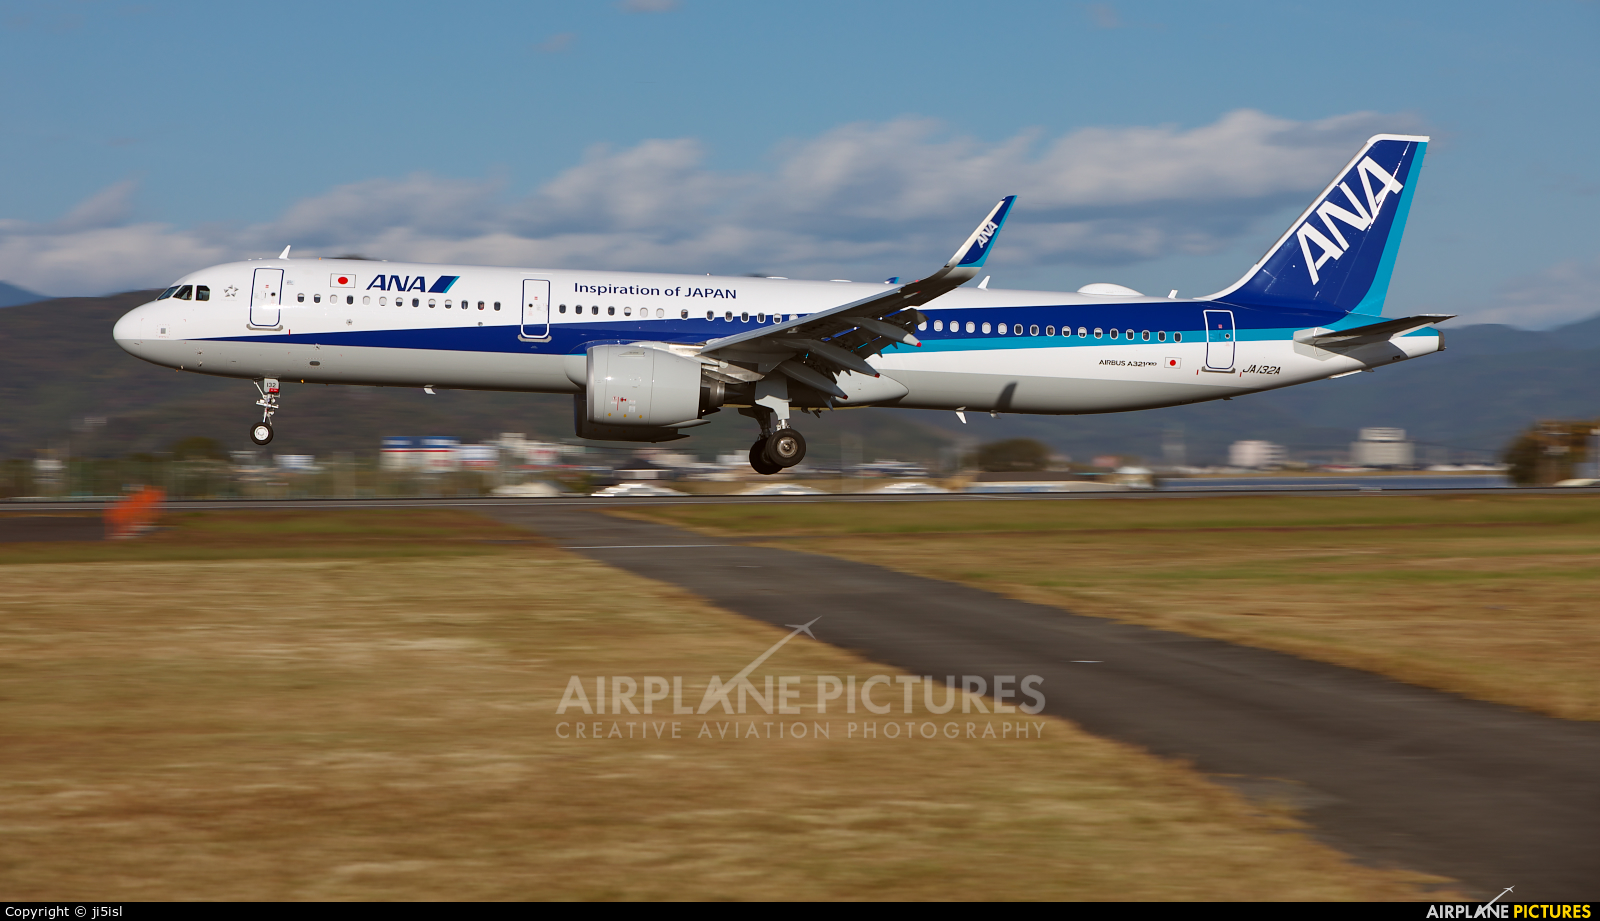 Ja132a Ana All Nippon Airways Airbus A321 Neo At Kōchi Photo Id Airplane Pictures Net